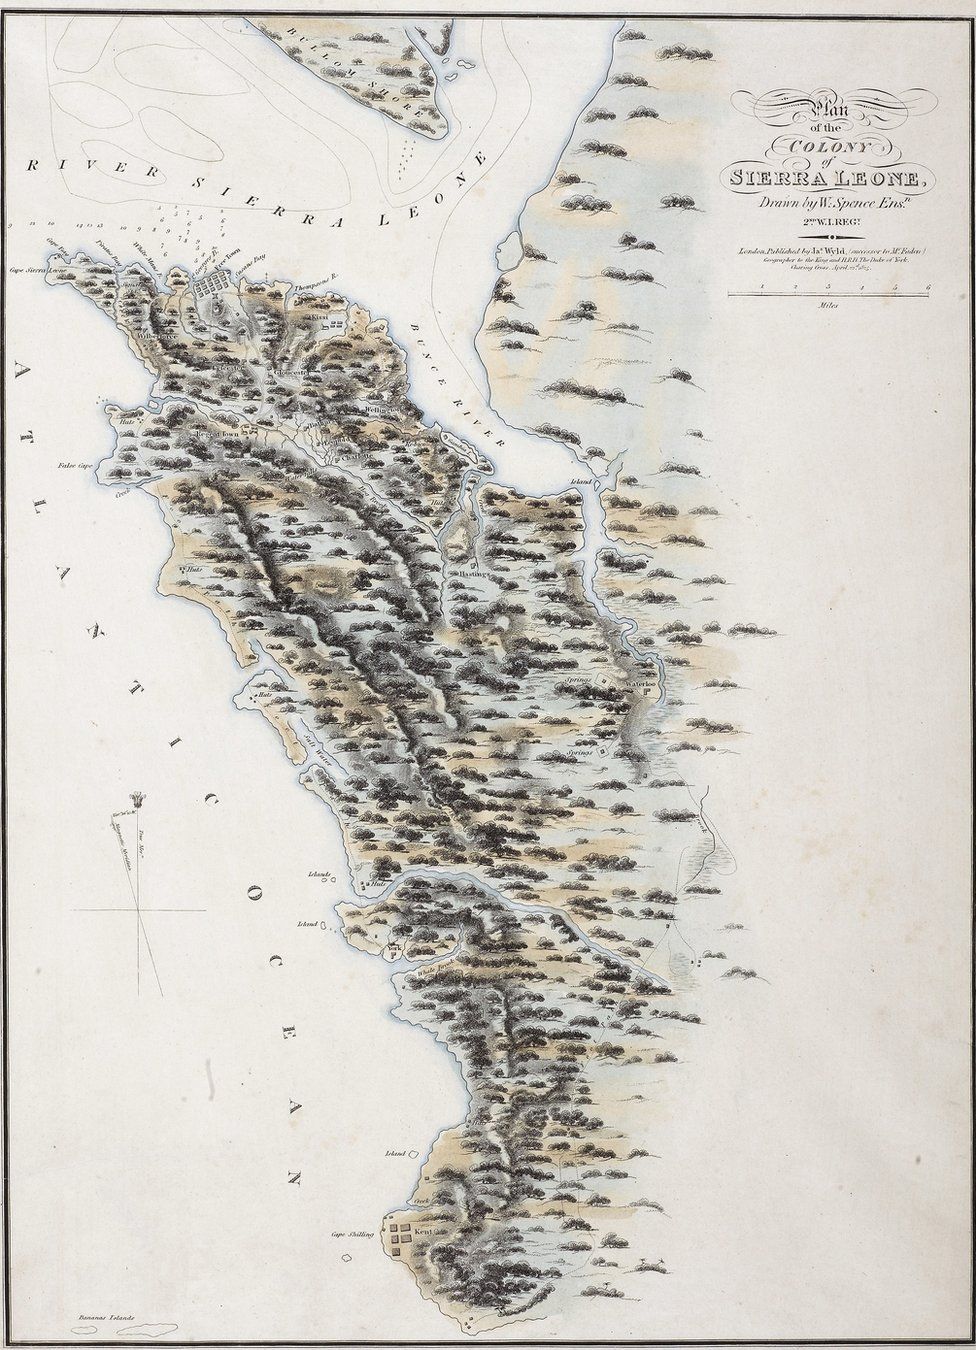 Plan of the Colony of Sierra Leone 1825